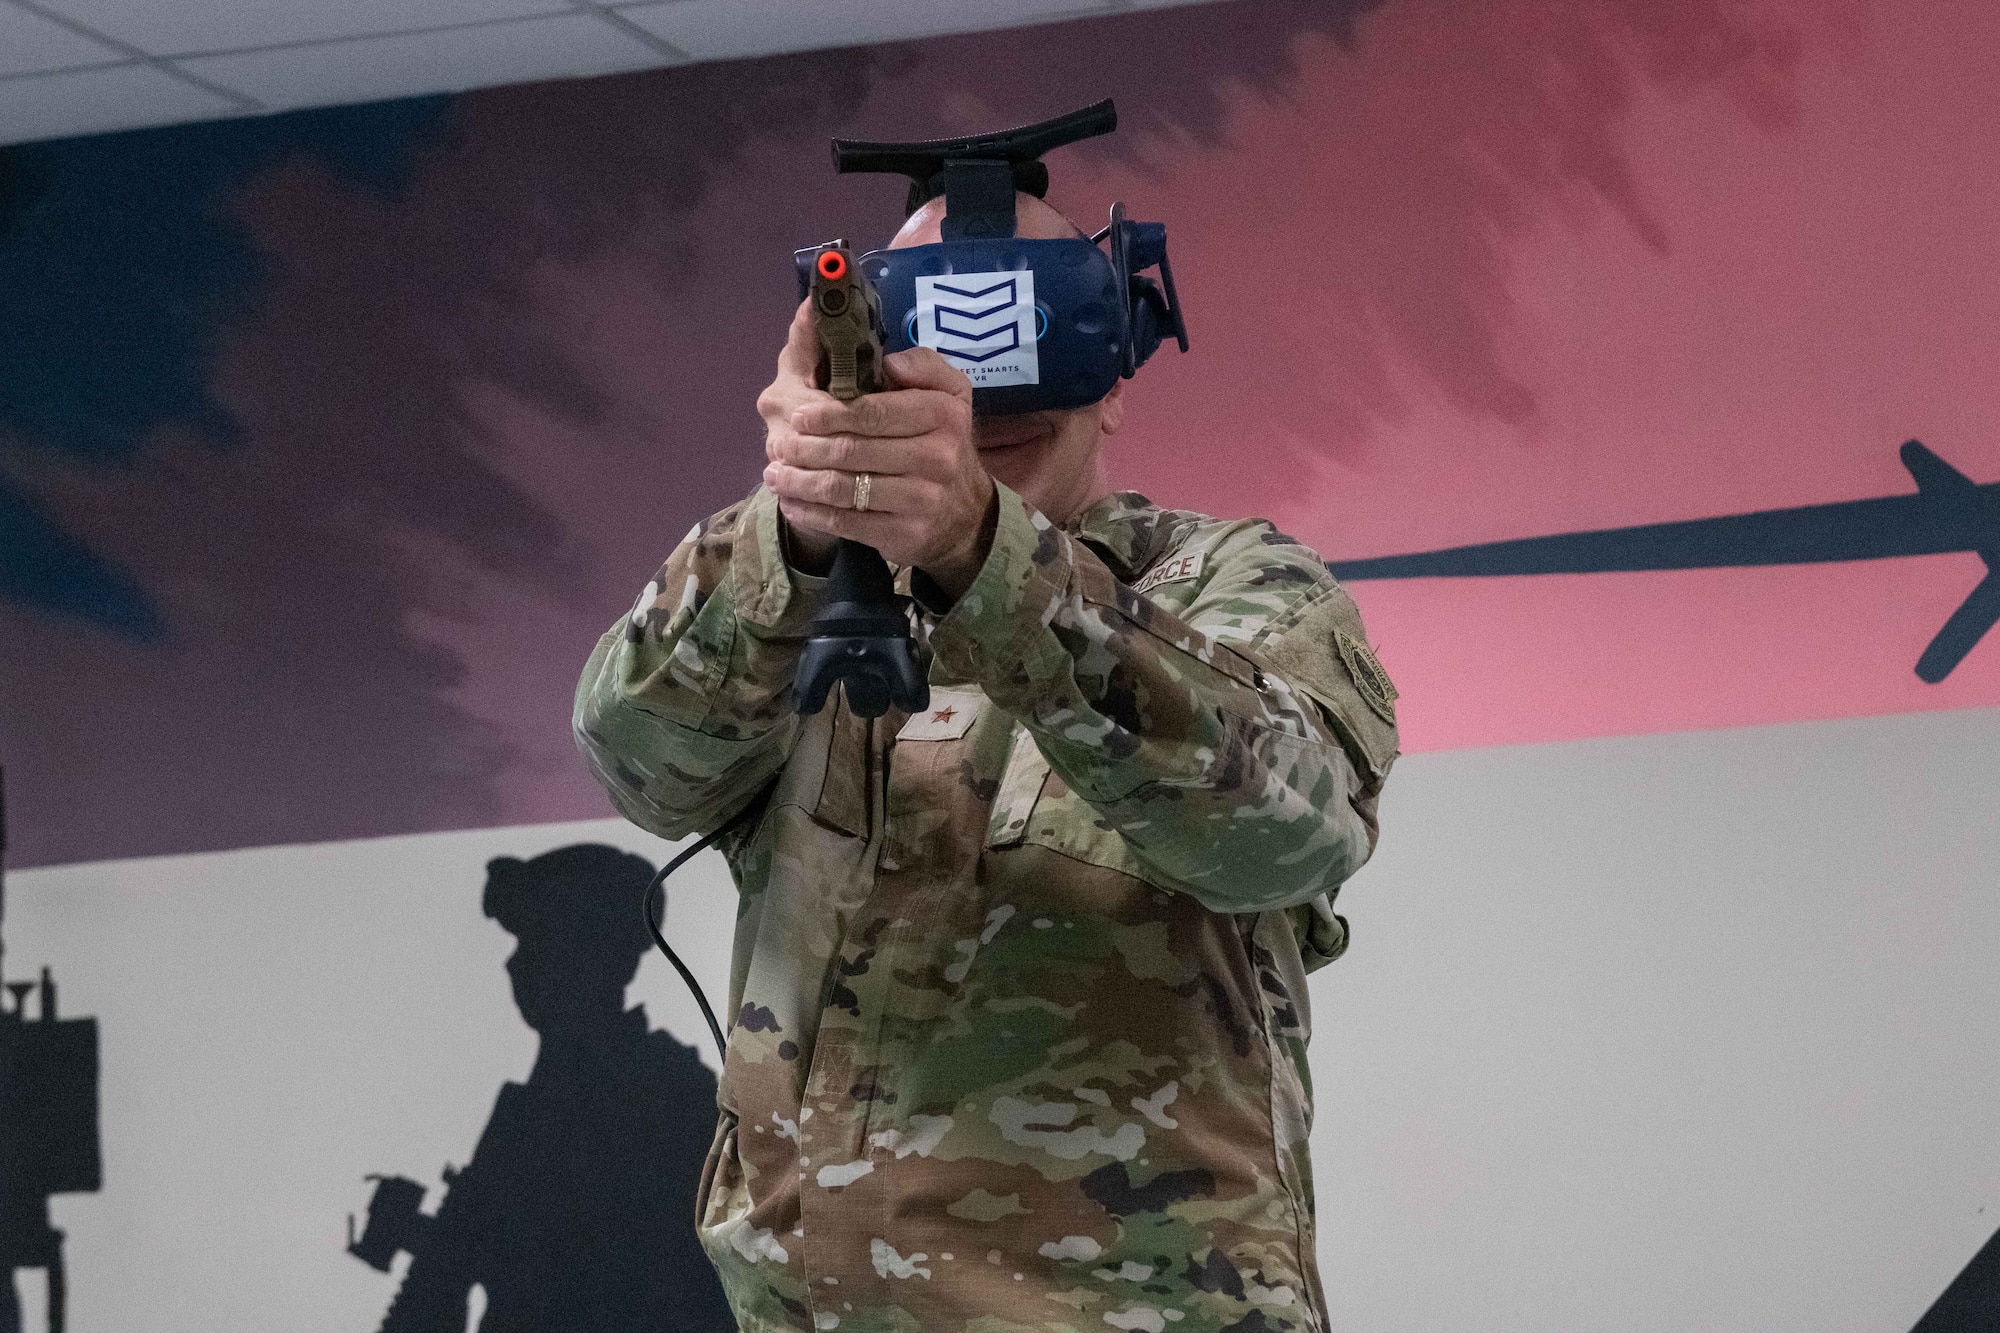 U.S. Air Force Brig. Gen. Gerald Donohue, 379th Air Expeditionary Wing Commander, practices a training simulation through virtual reality on Al Udeid Air Base, Qatar, May 24, 2022. The Street Smart VR Simulator allows airmen to simulate scenarios that they may face in real life. (U.S. Air National Guard photo by Airman 1st Class Constantine Bambakidis)